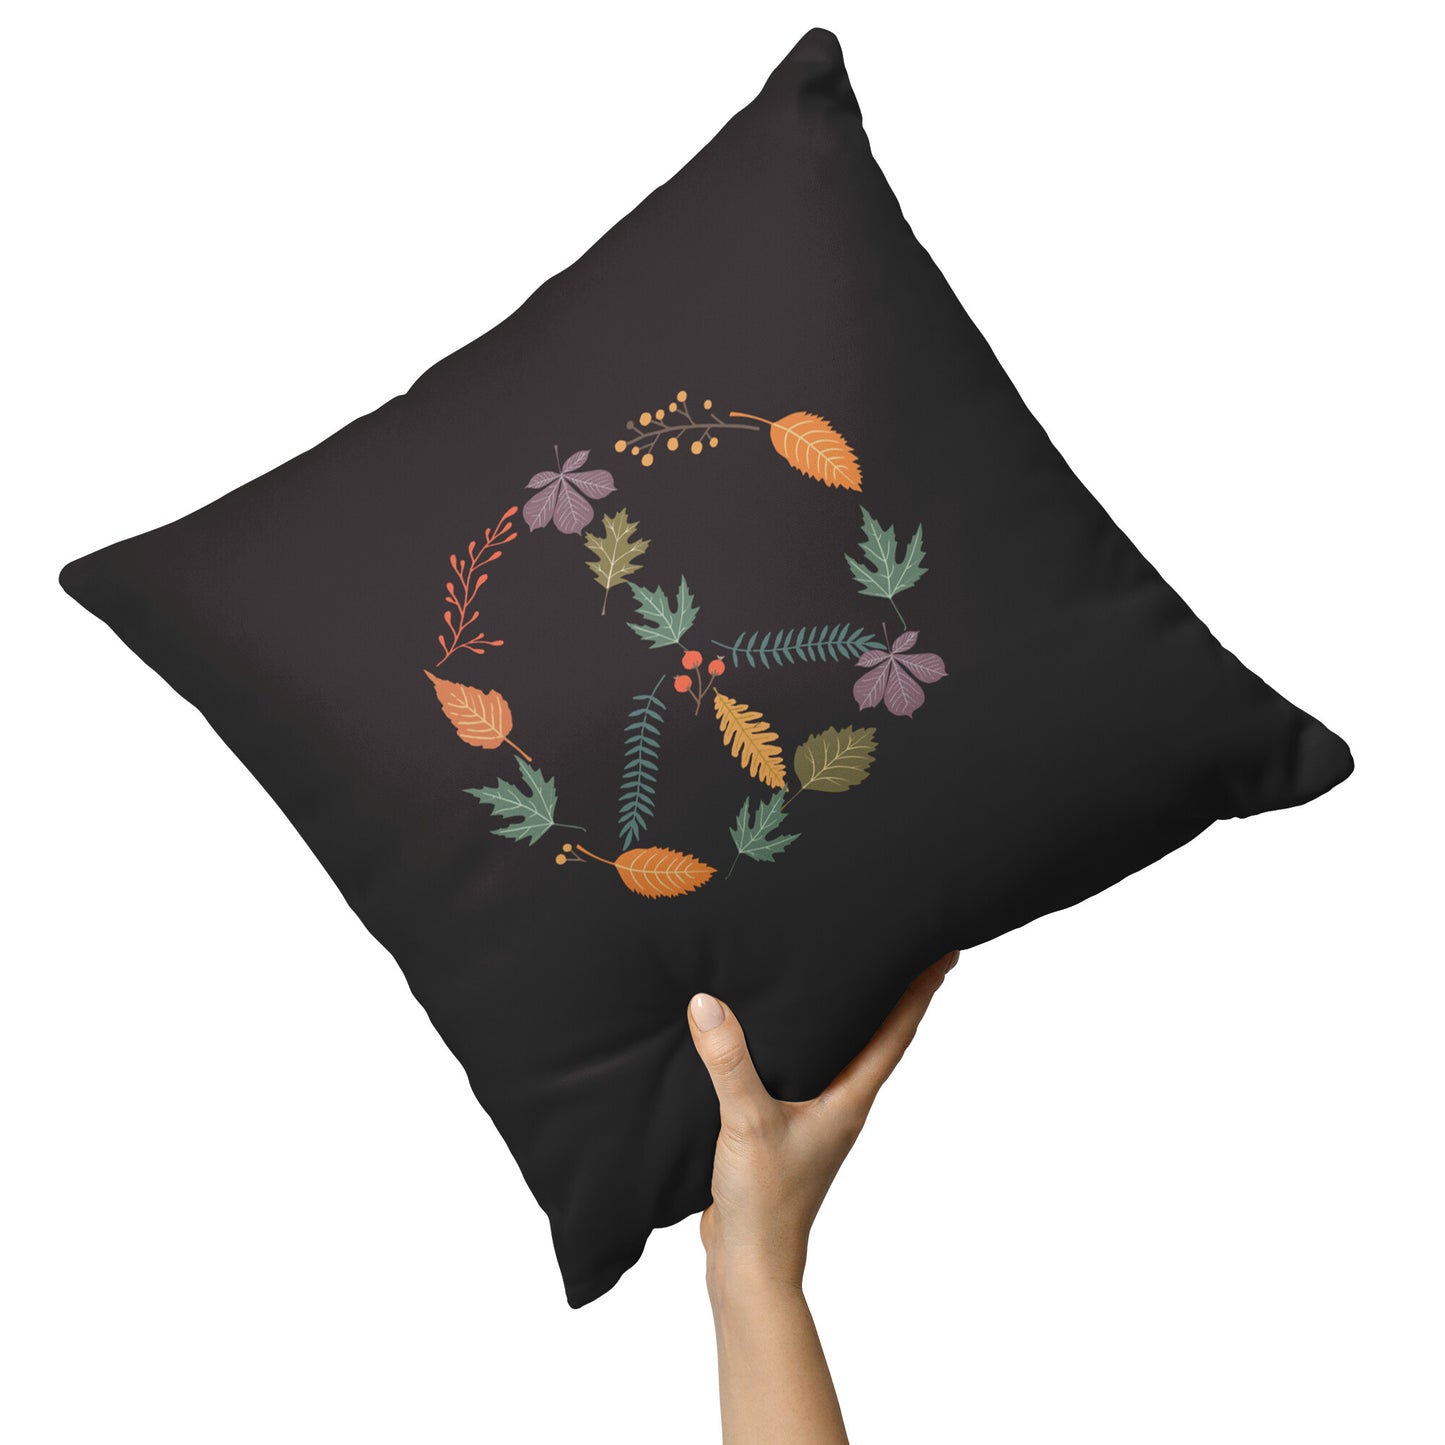 Fall Peace Sign Pillows And Covers